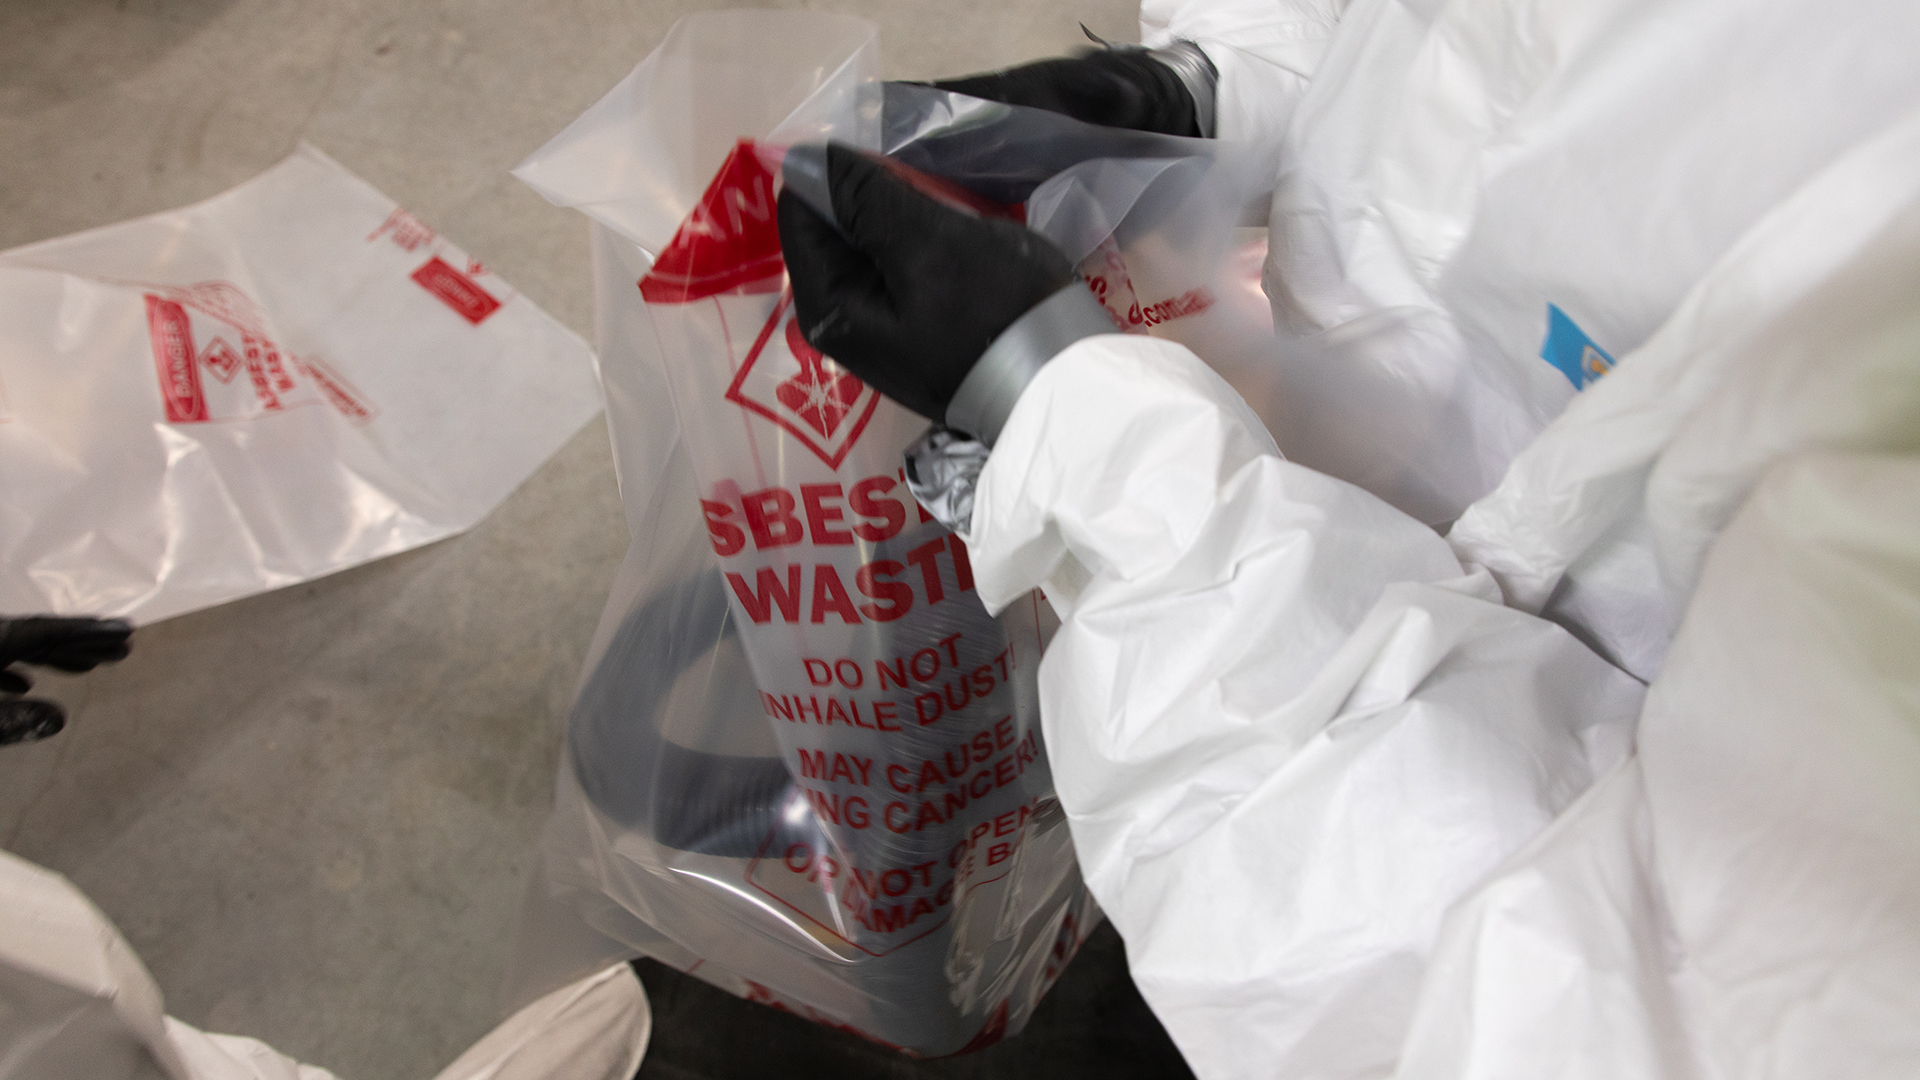 Course participant bagging tools that have been used in asbestos removal.